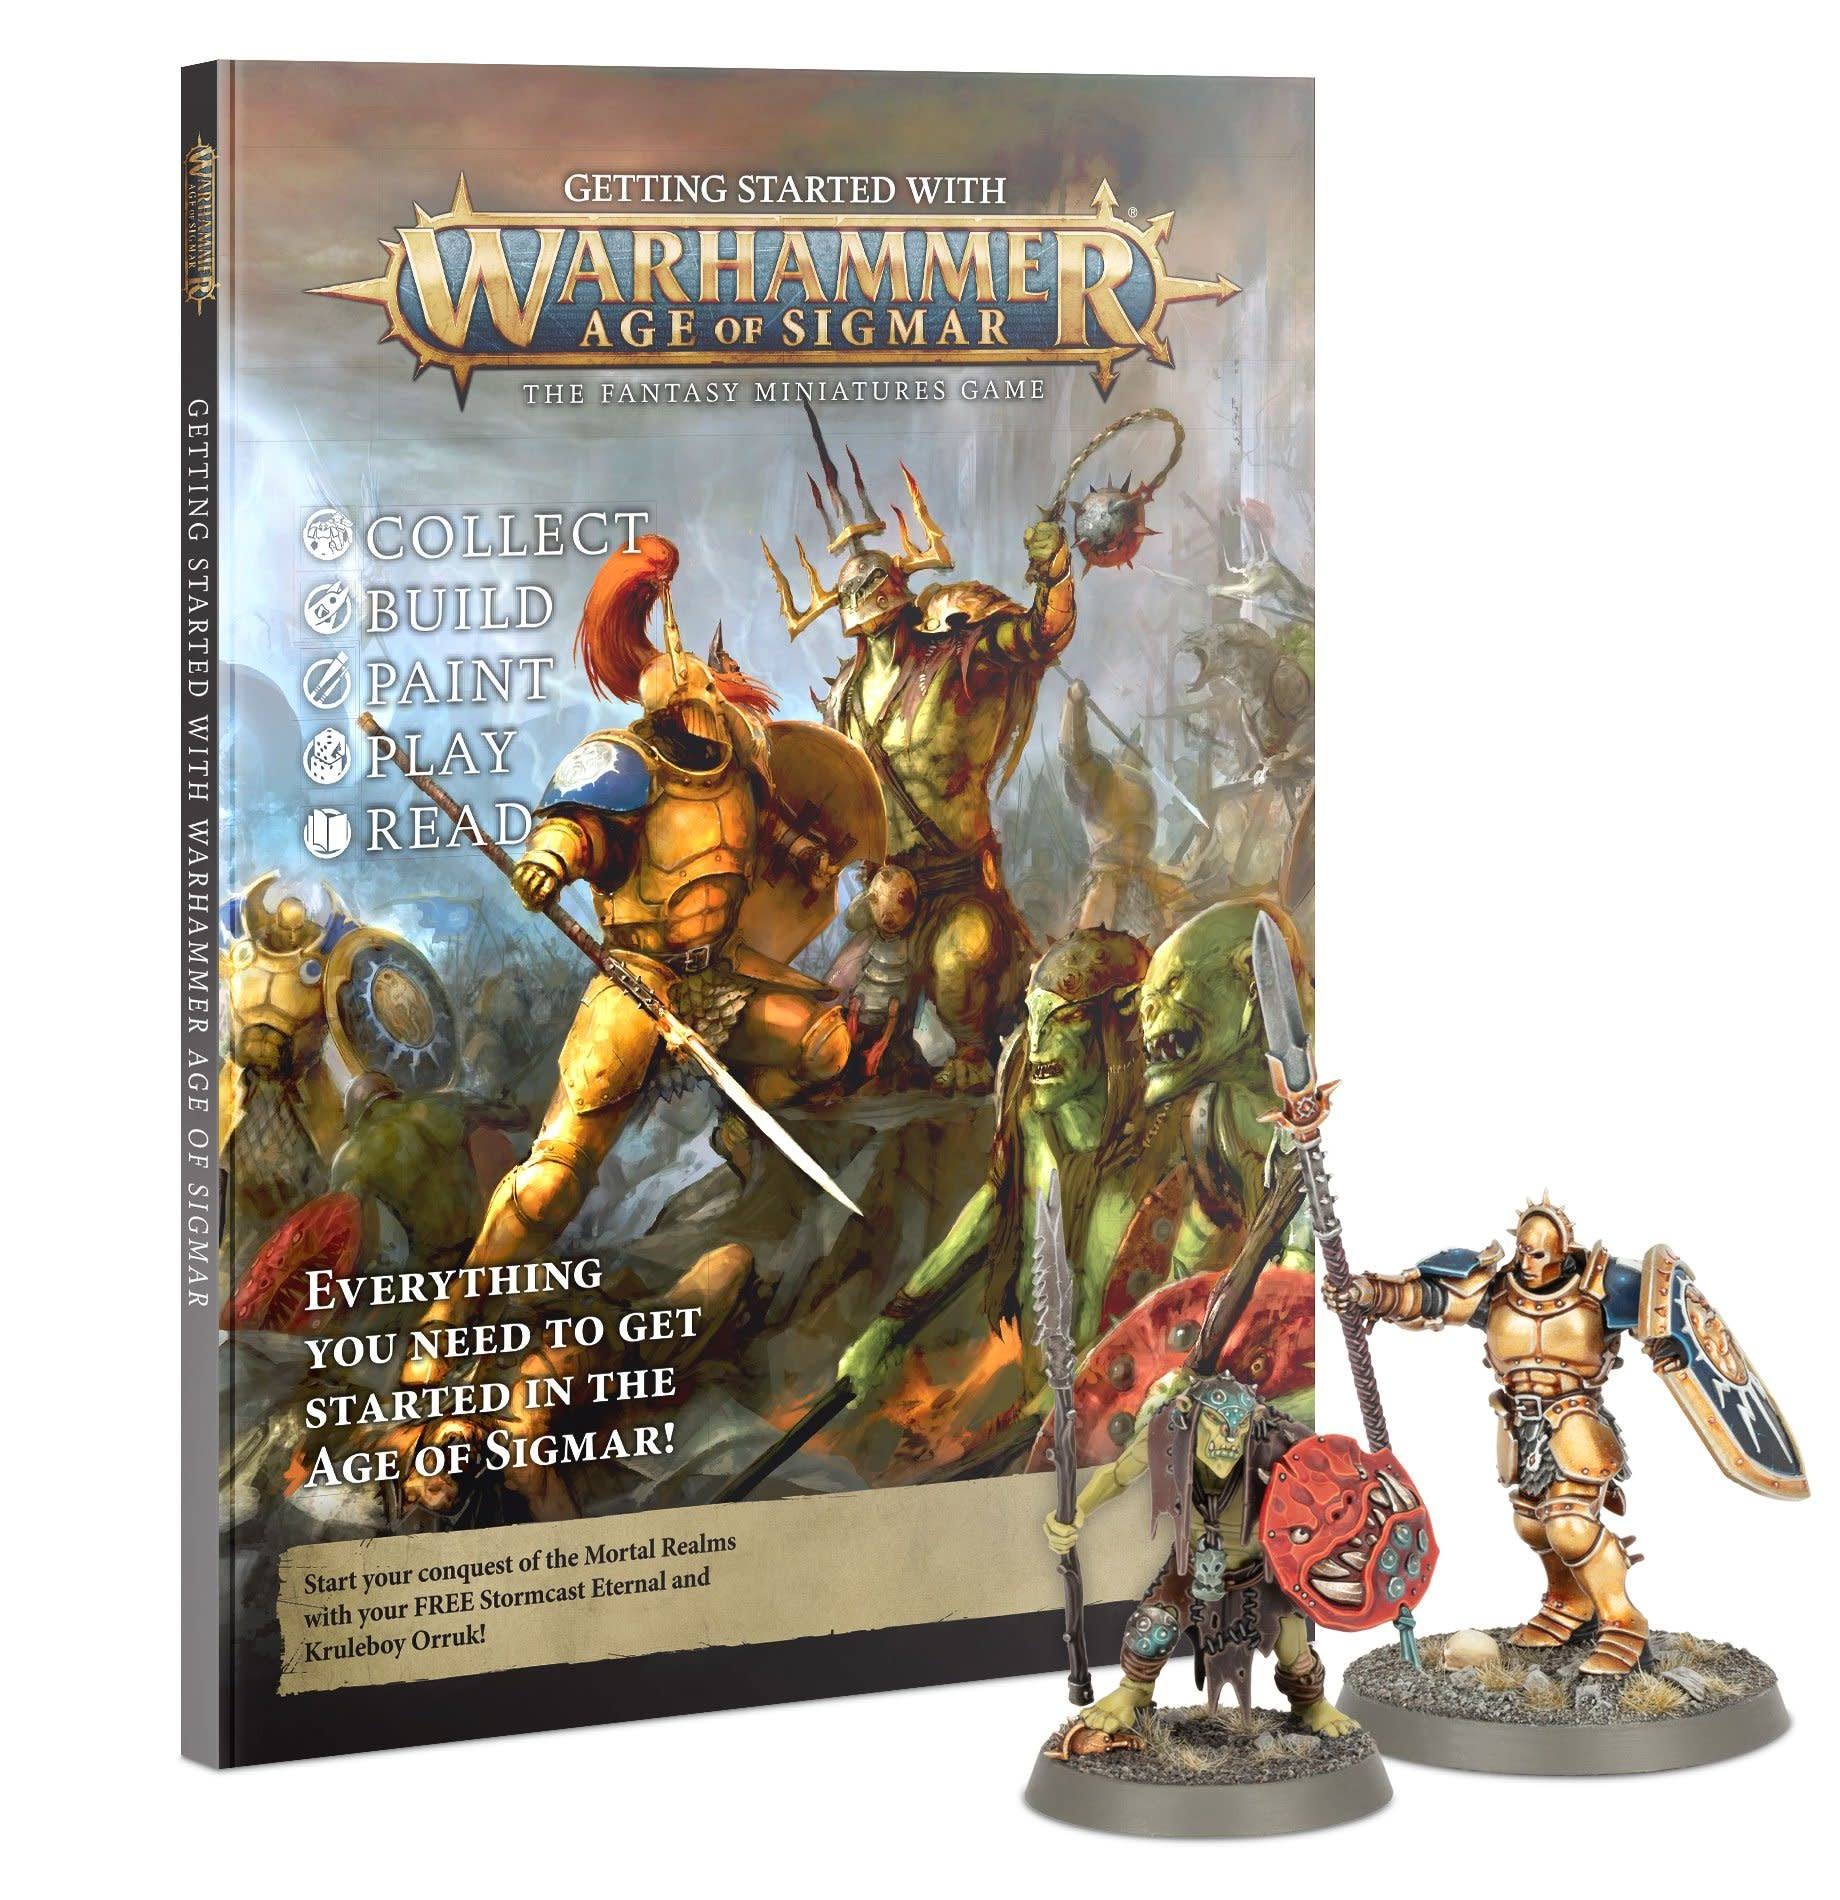 Games Workshop - Warhammer Getting Started With Age Of Sigmar Magazine